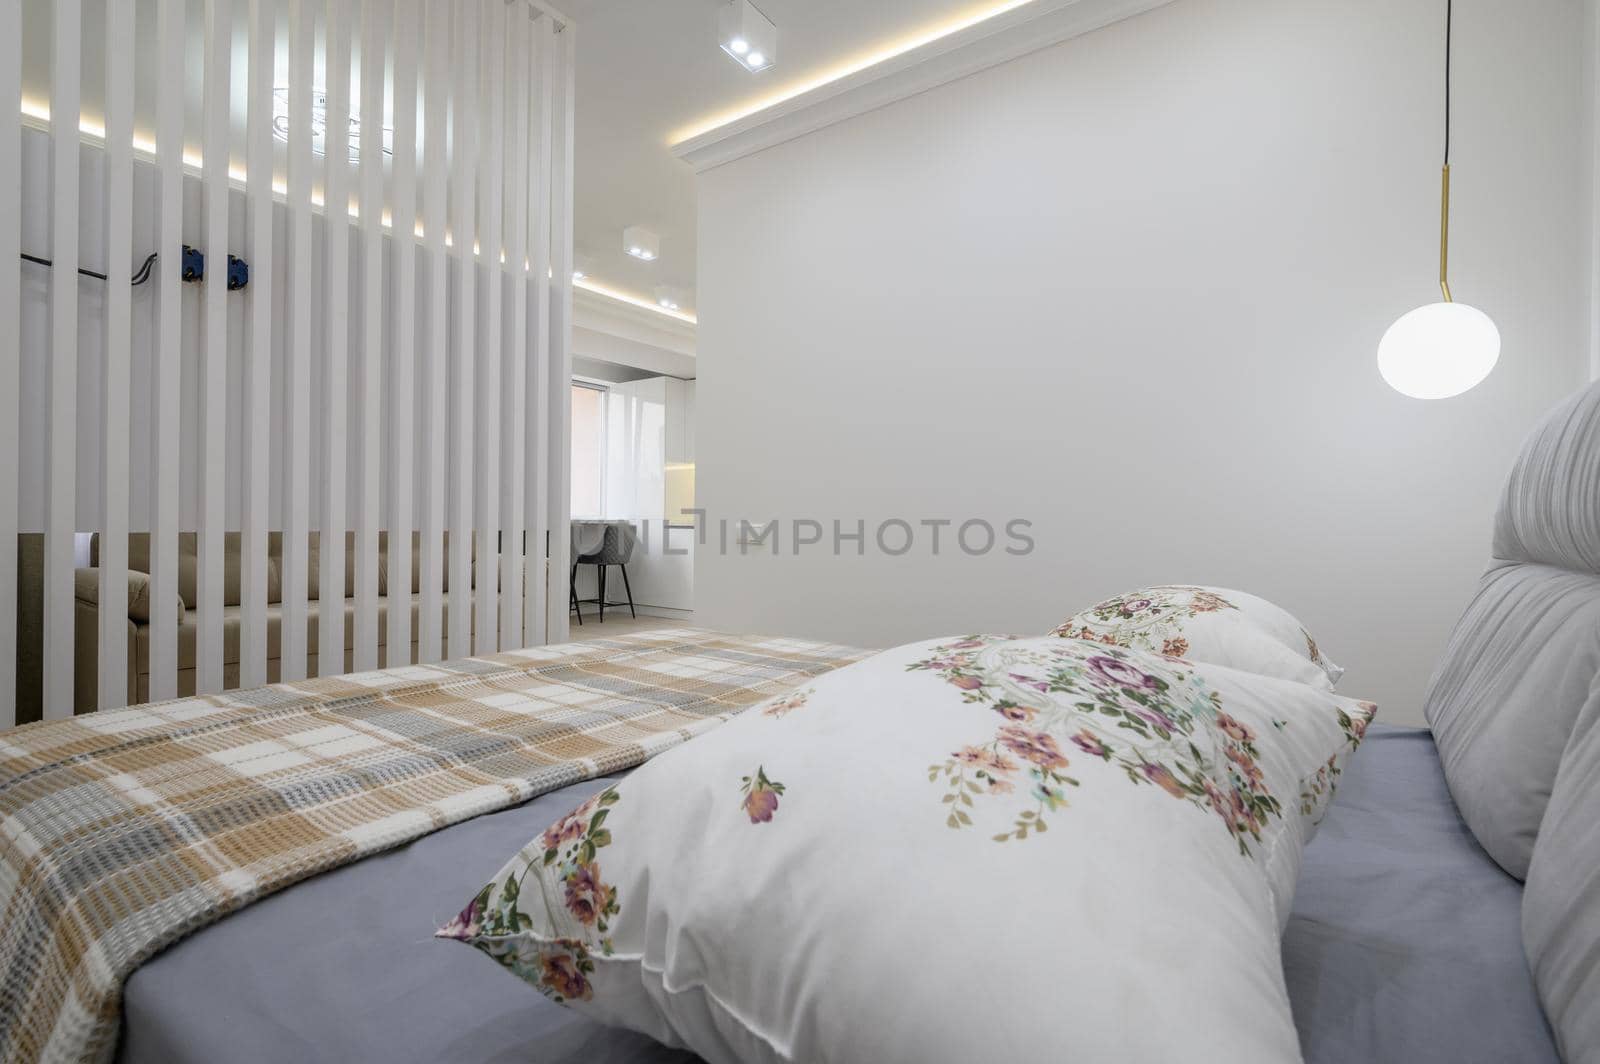 Stylish interior of gray and white bedroom with comfortable double bed